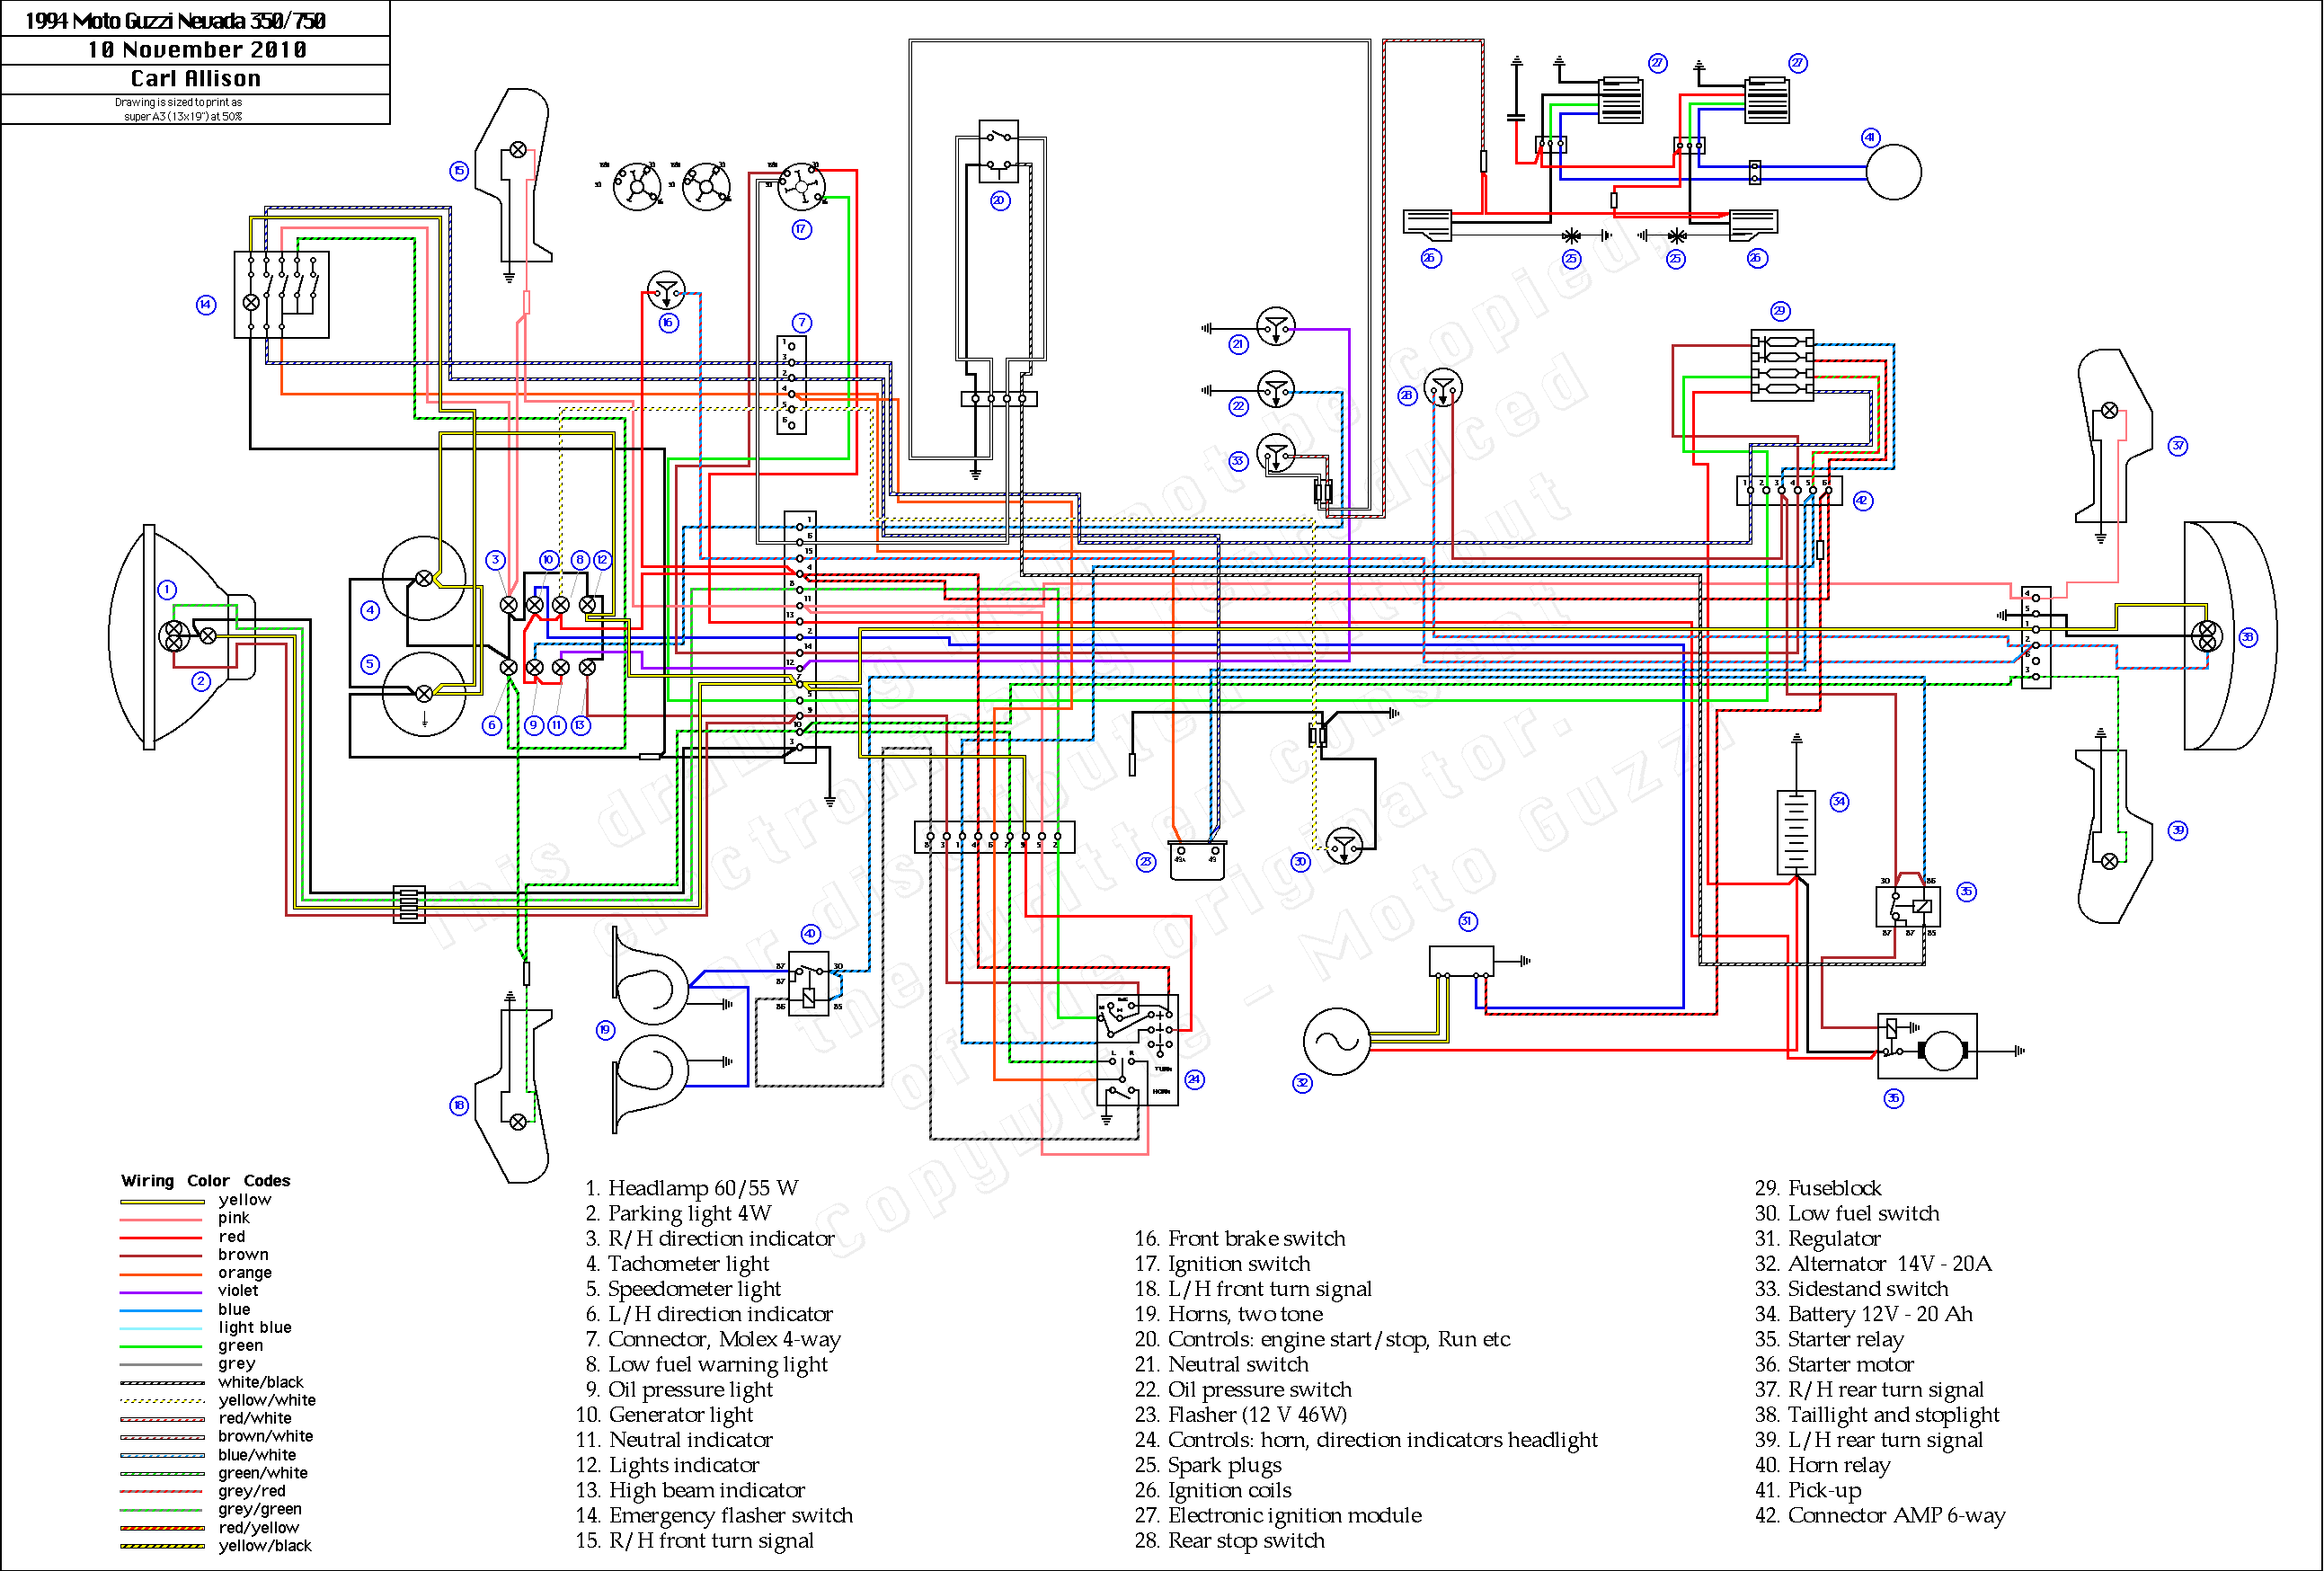 3 Position Motorcycle Ignition Switch Wiring Diagram from schematron.org